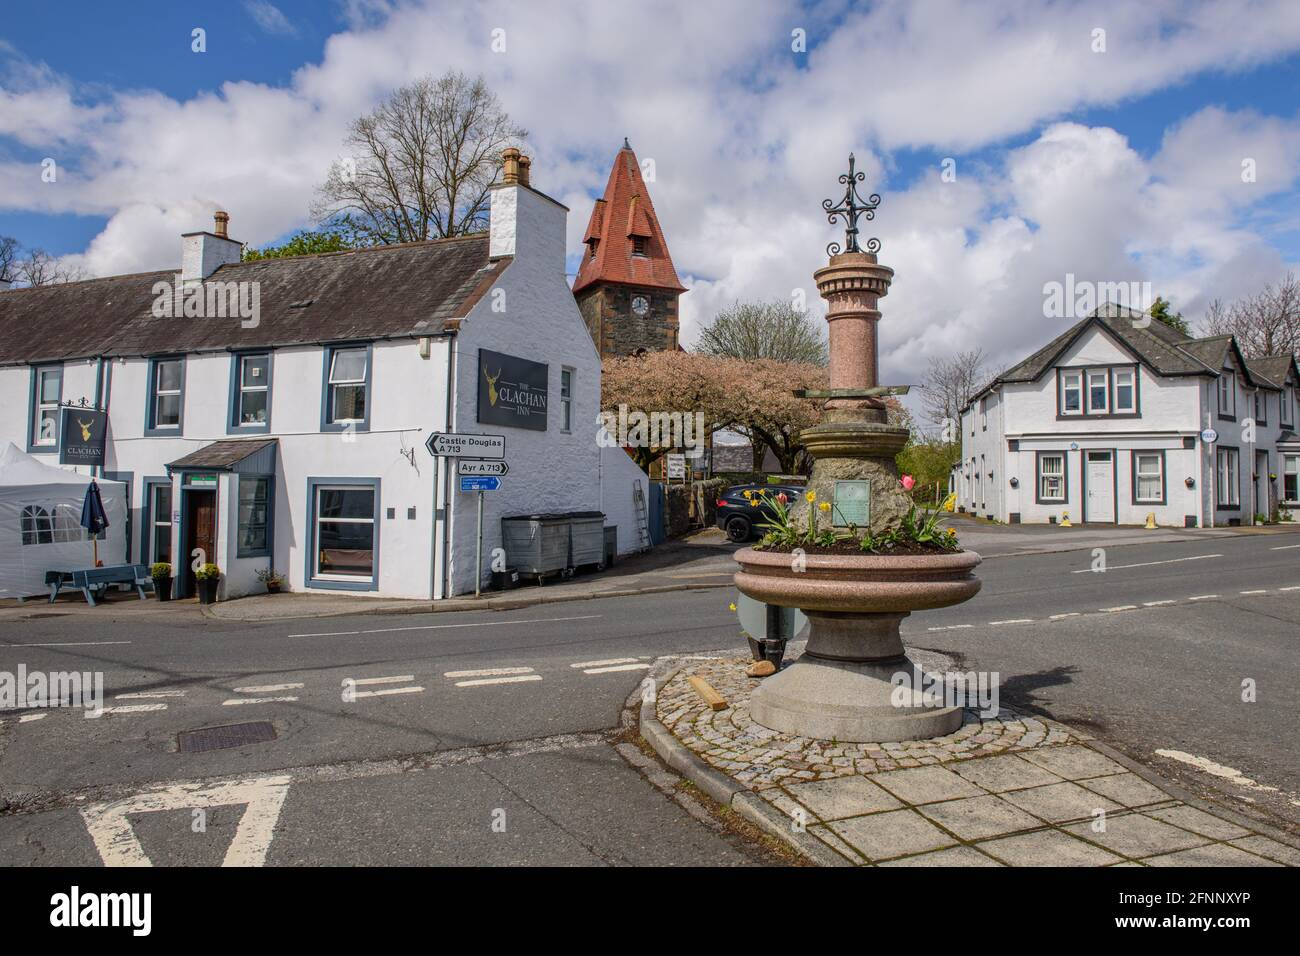 The Clachan Inn, Town Hall and Police Station at St.John's Town of Dalry in Dumfries and Galloway Scotland Stock Photo